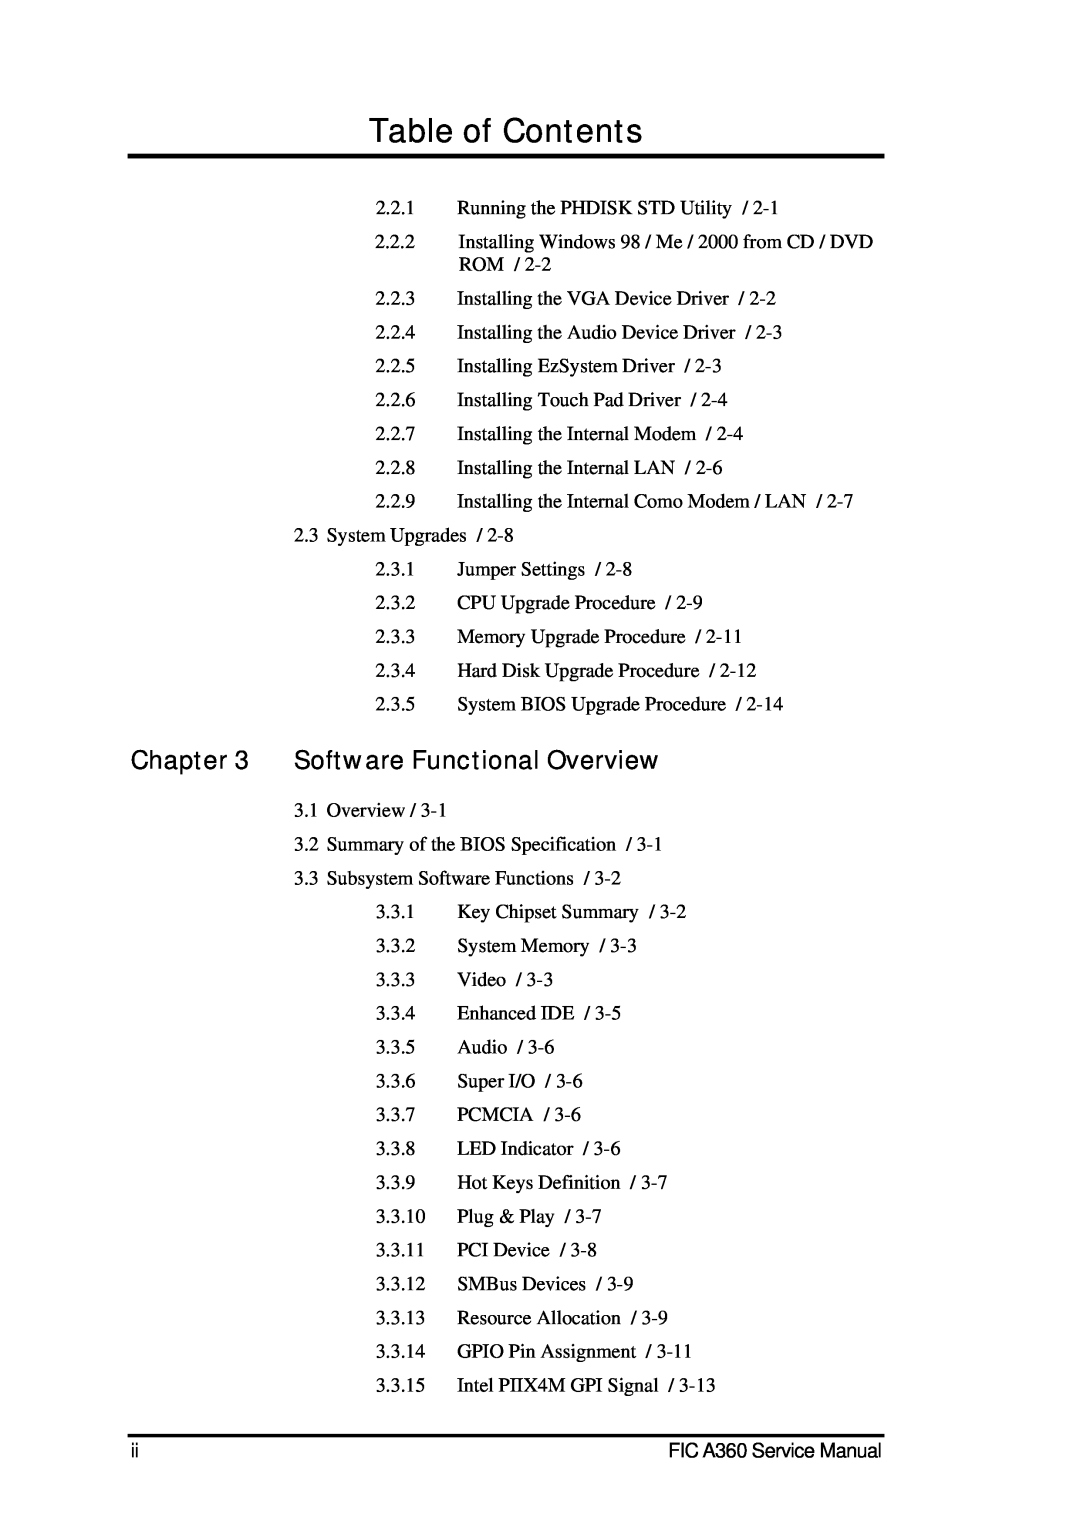 FIC A360 service manual Table of Contents, Software Functional Overview 